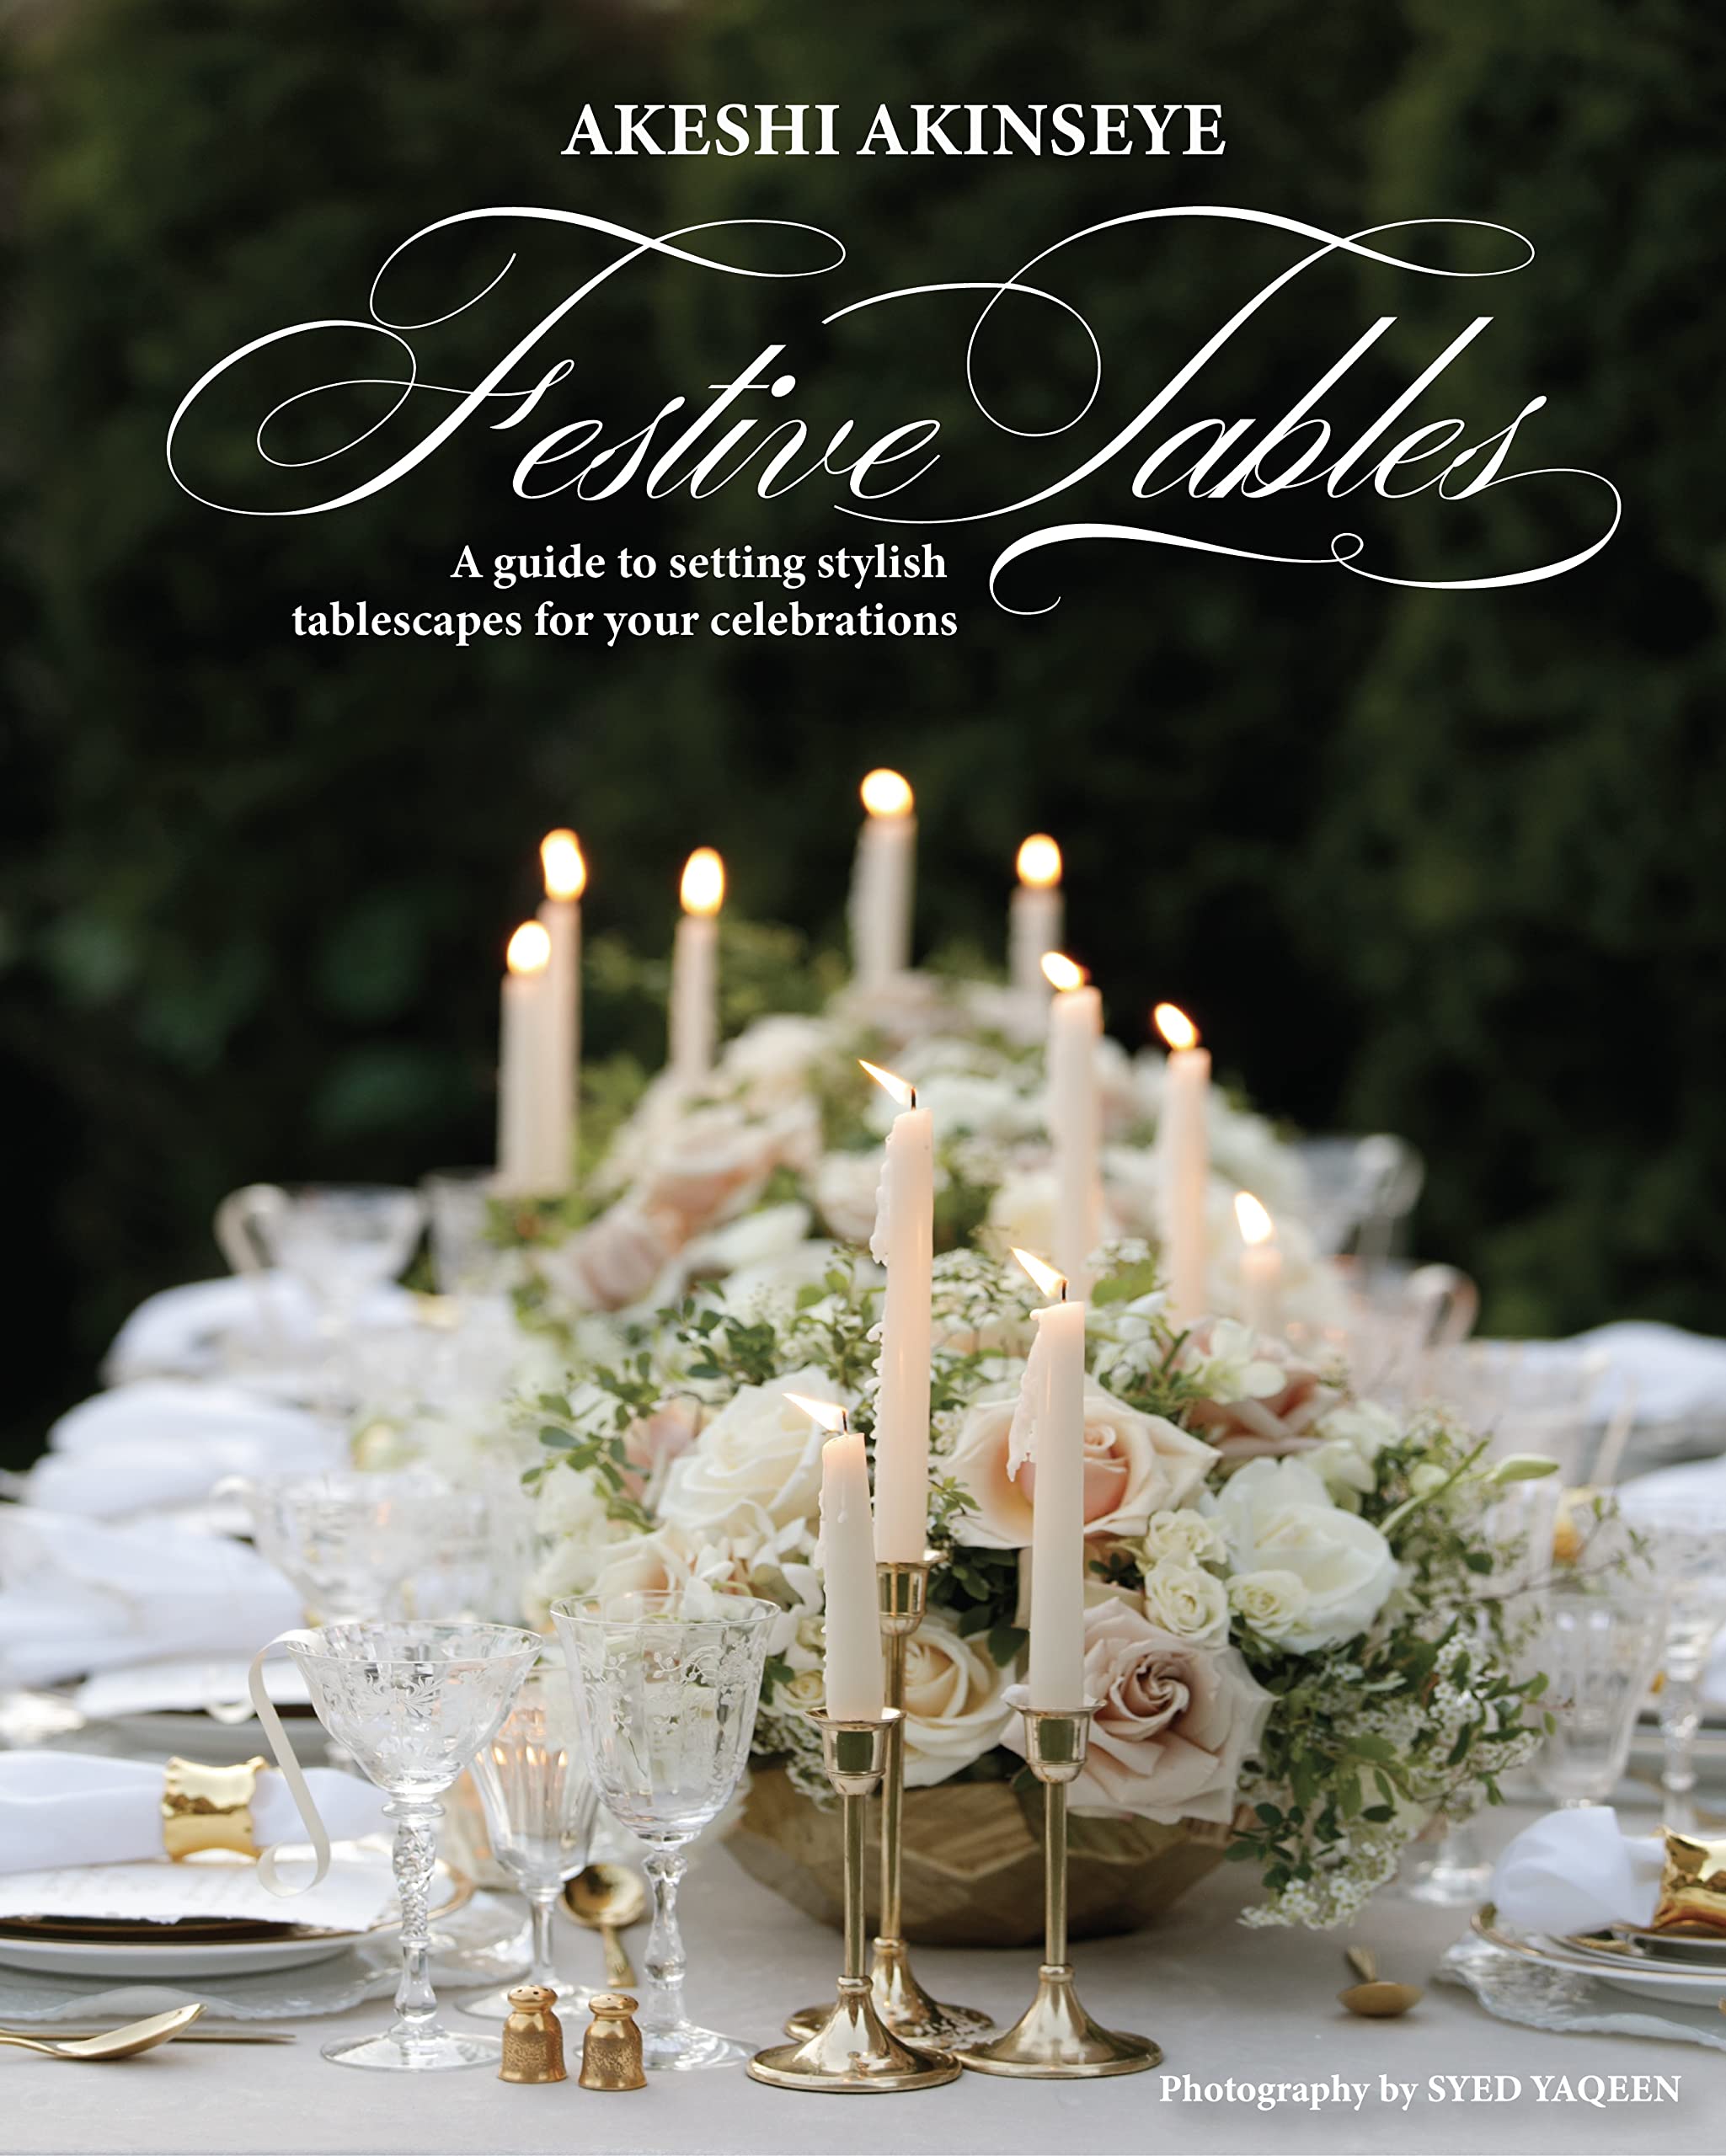 Festive Tables: A guide to setting stylish tablescapes for your celebrations (English Edition)